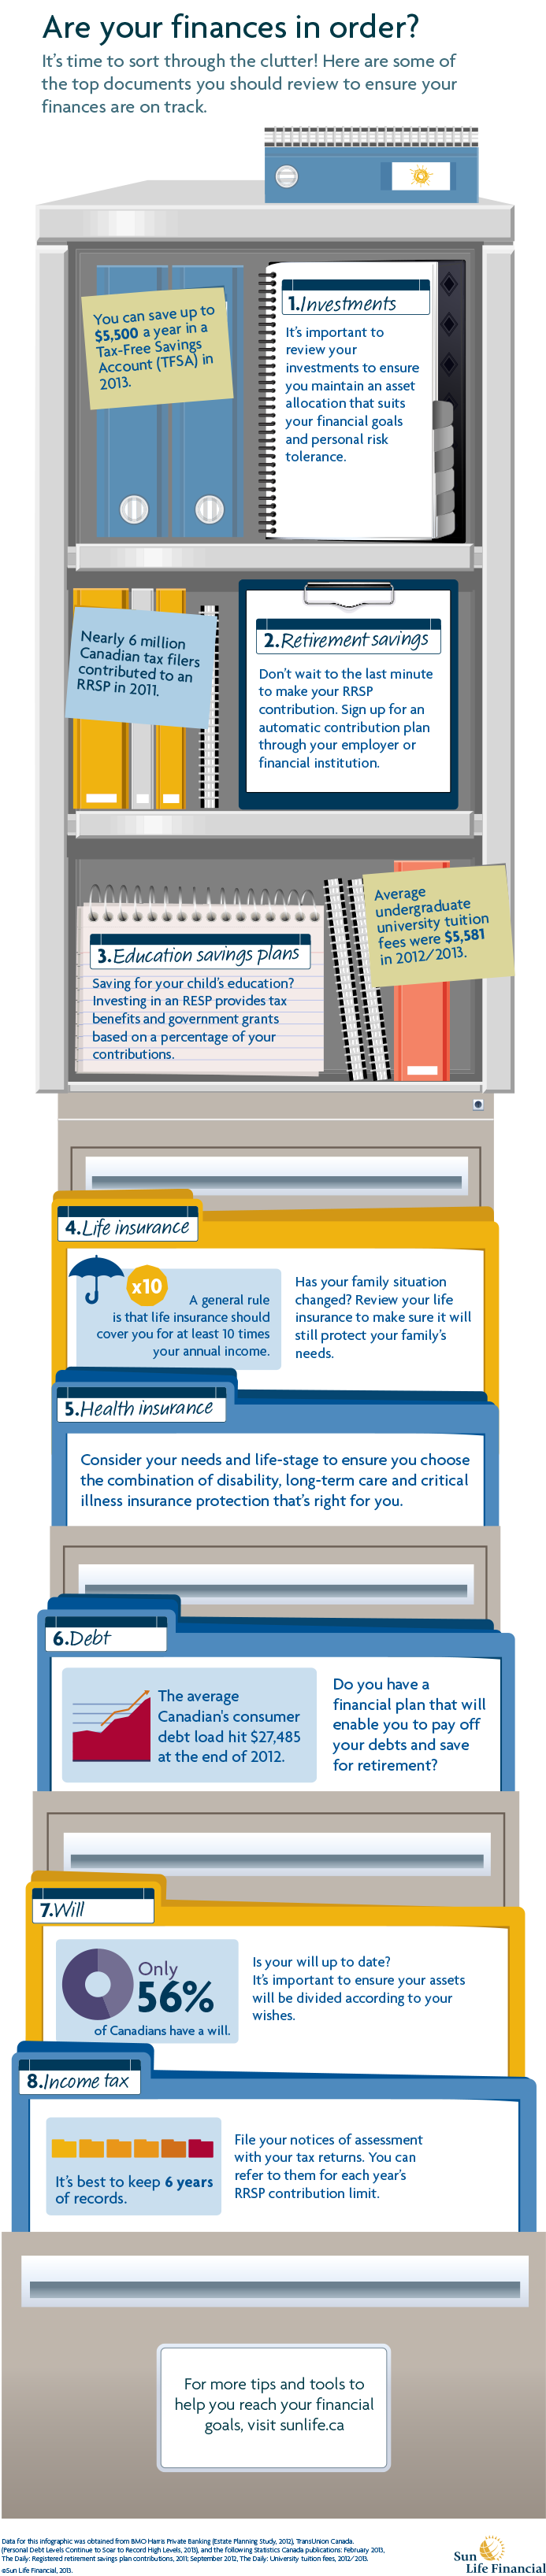 Are your finances in order? (Infographic) Text alternative to follow